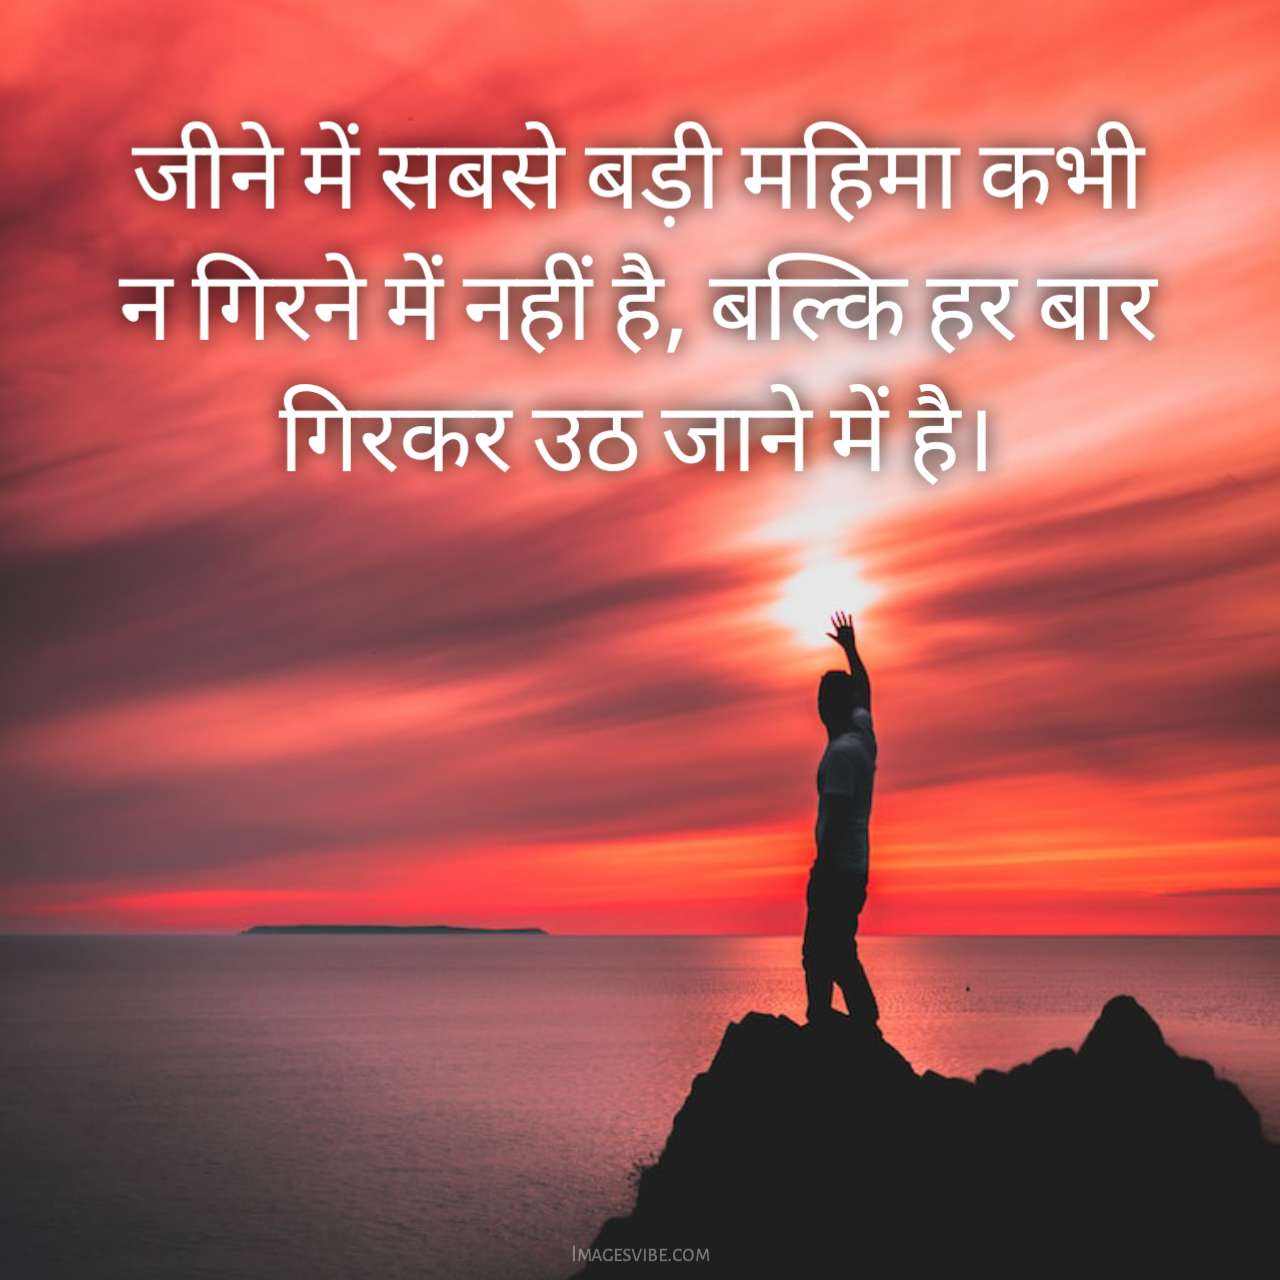 Best Heart Touching Life Quotes In Hindi Images In Images Vibe